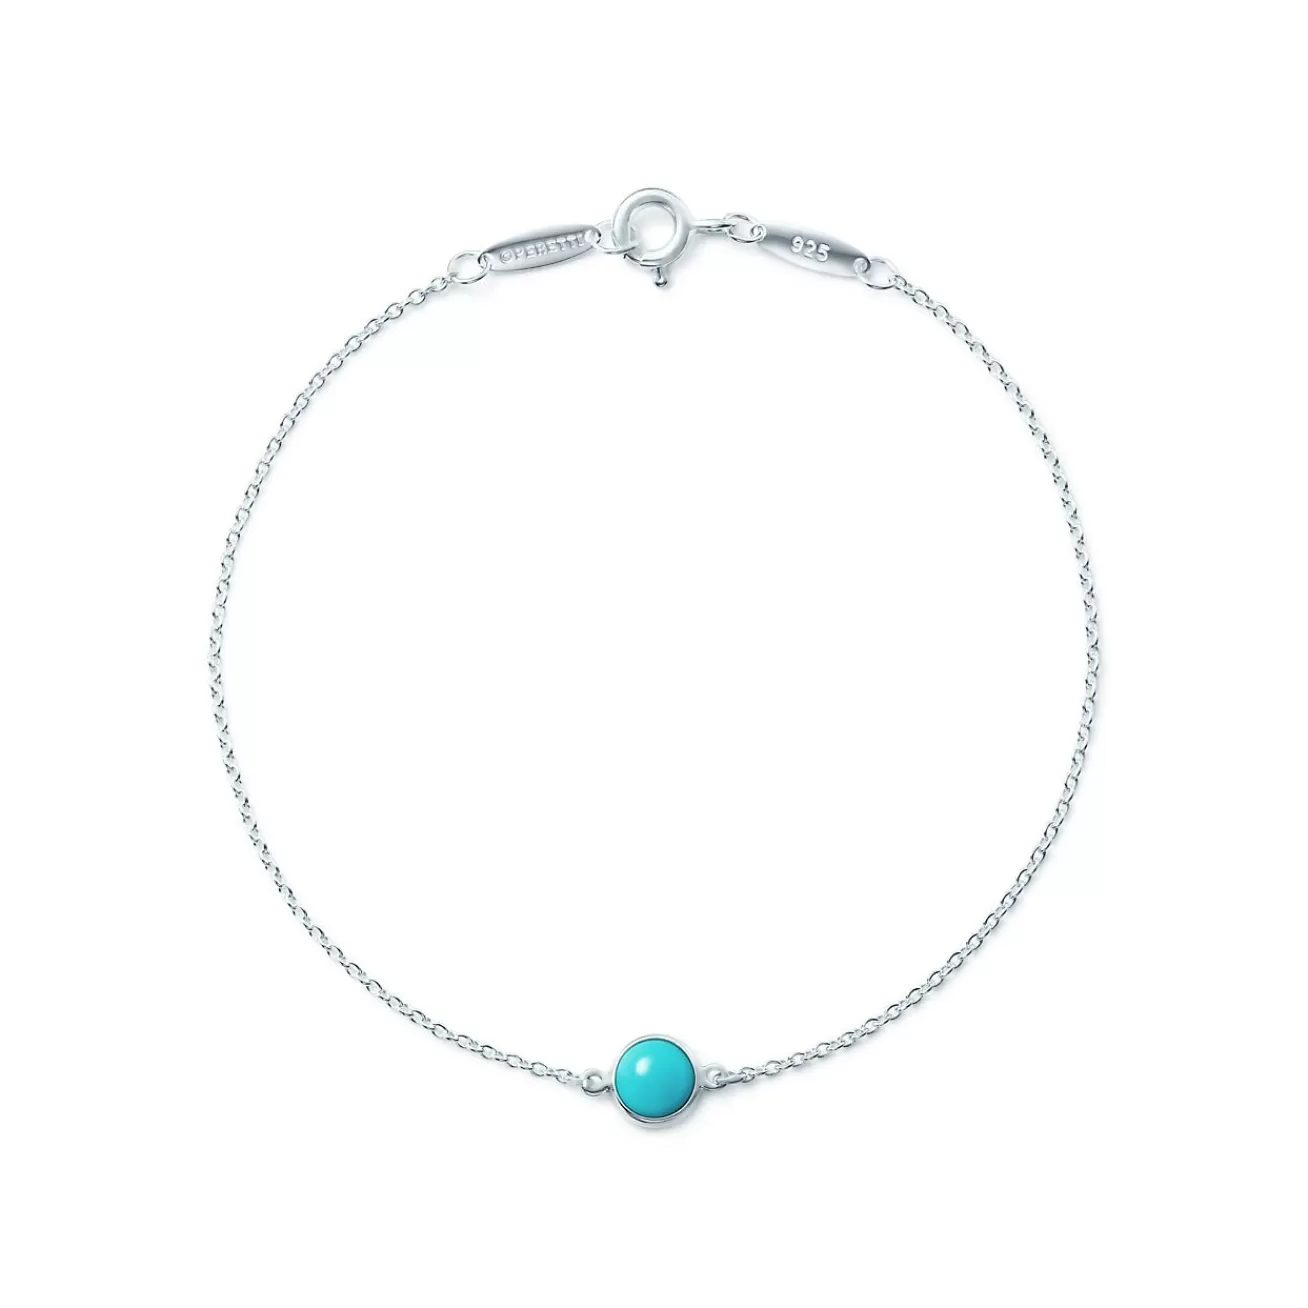 Tiffany & Co. Elsa Peretti® Color by the Yard Turquoise Bracelet in Silver | ^ Bracelets | Sterling Silver Jewelry